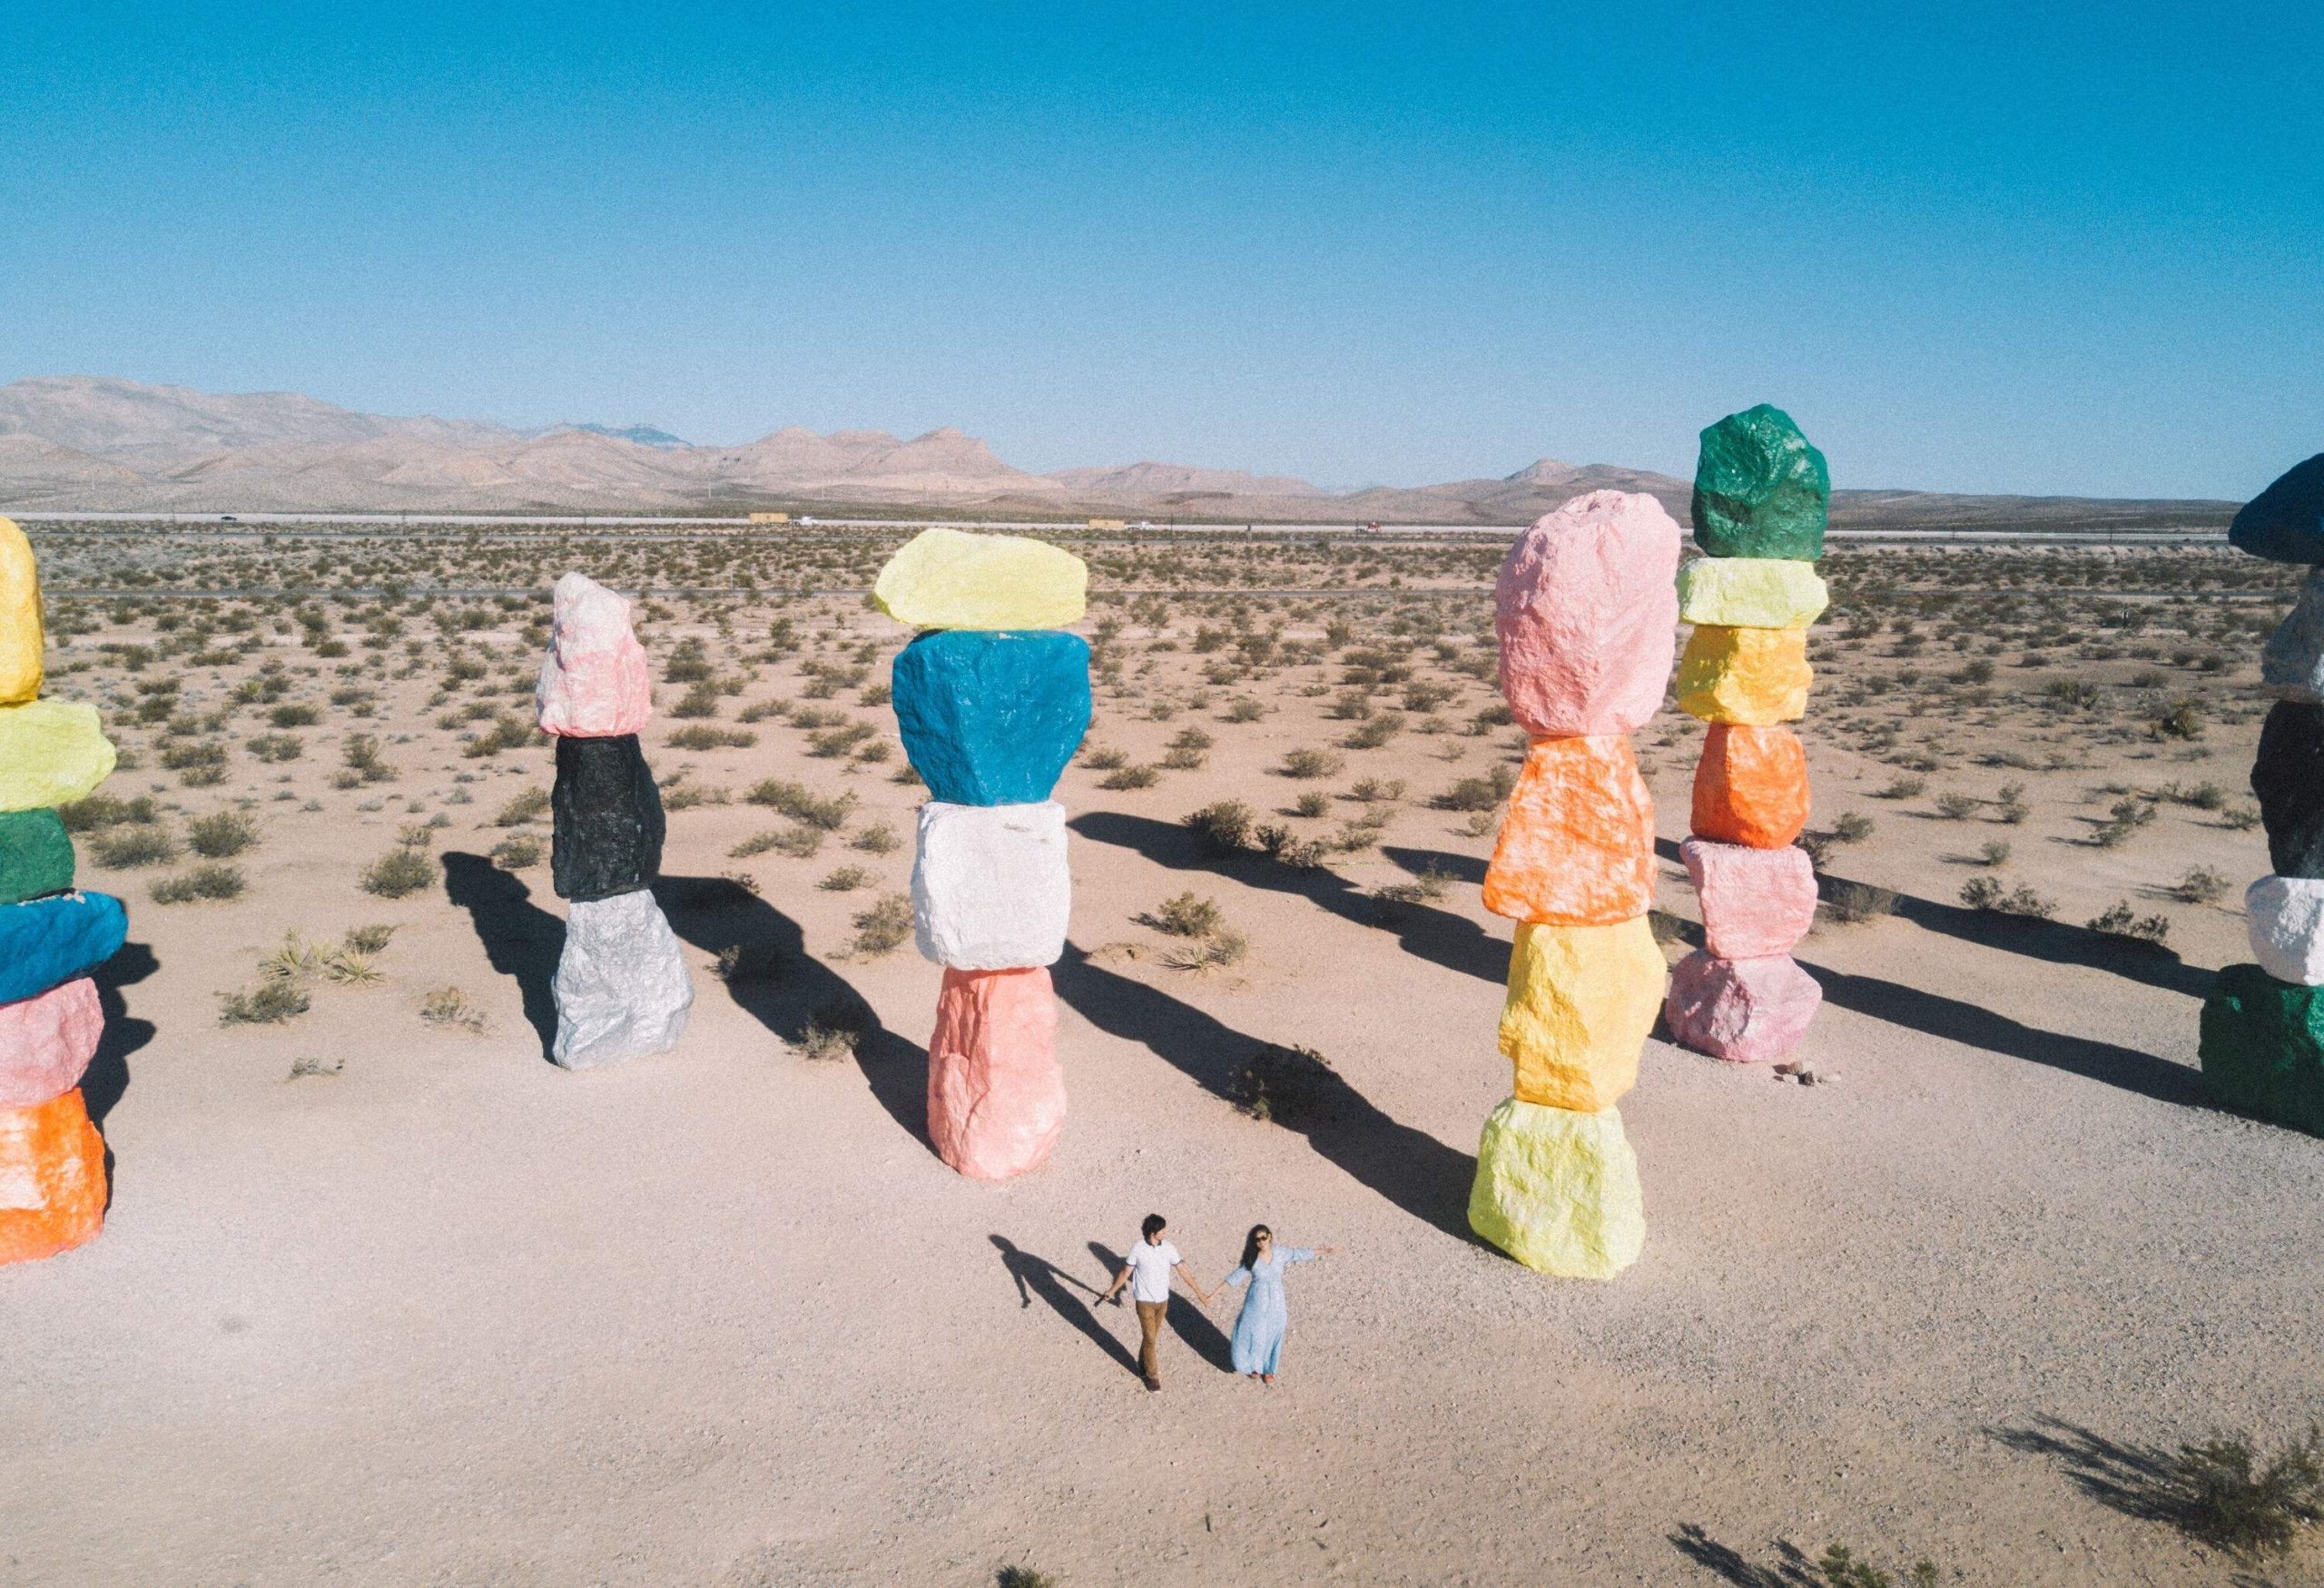 A couple walking among the stacks of painted boulders in Seven Magic Mountains.